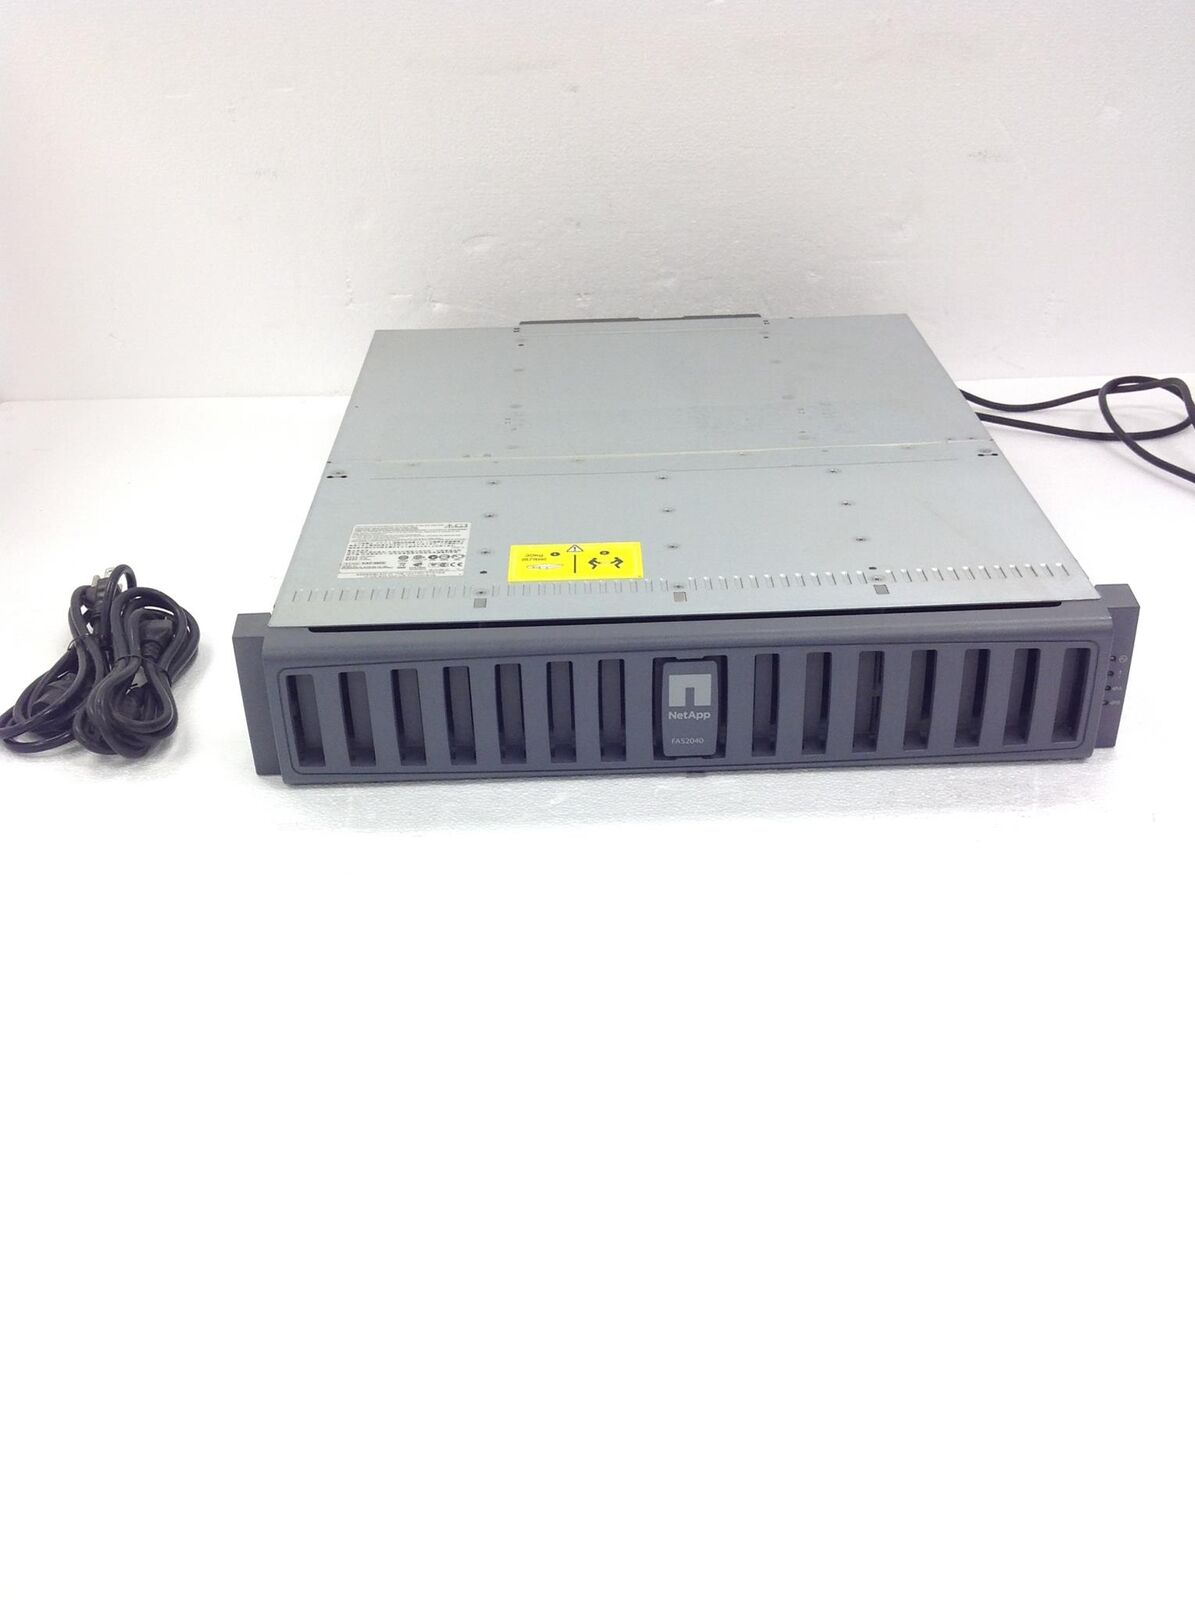 NetApp FAS2040 NAF-0602 Hard Drive Array Condition Used Working  Gray